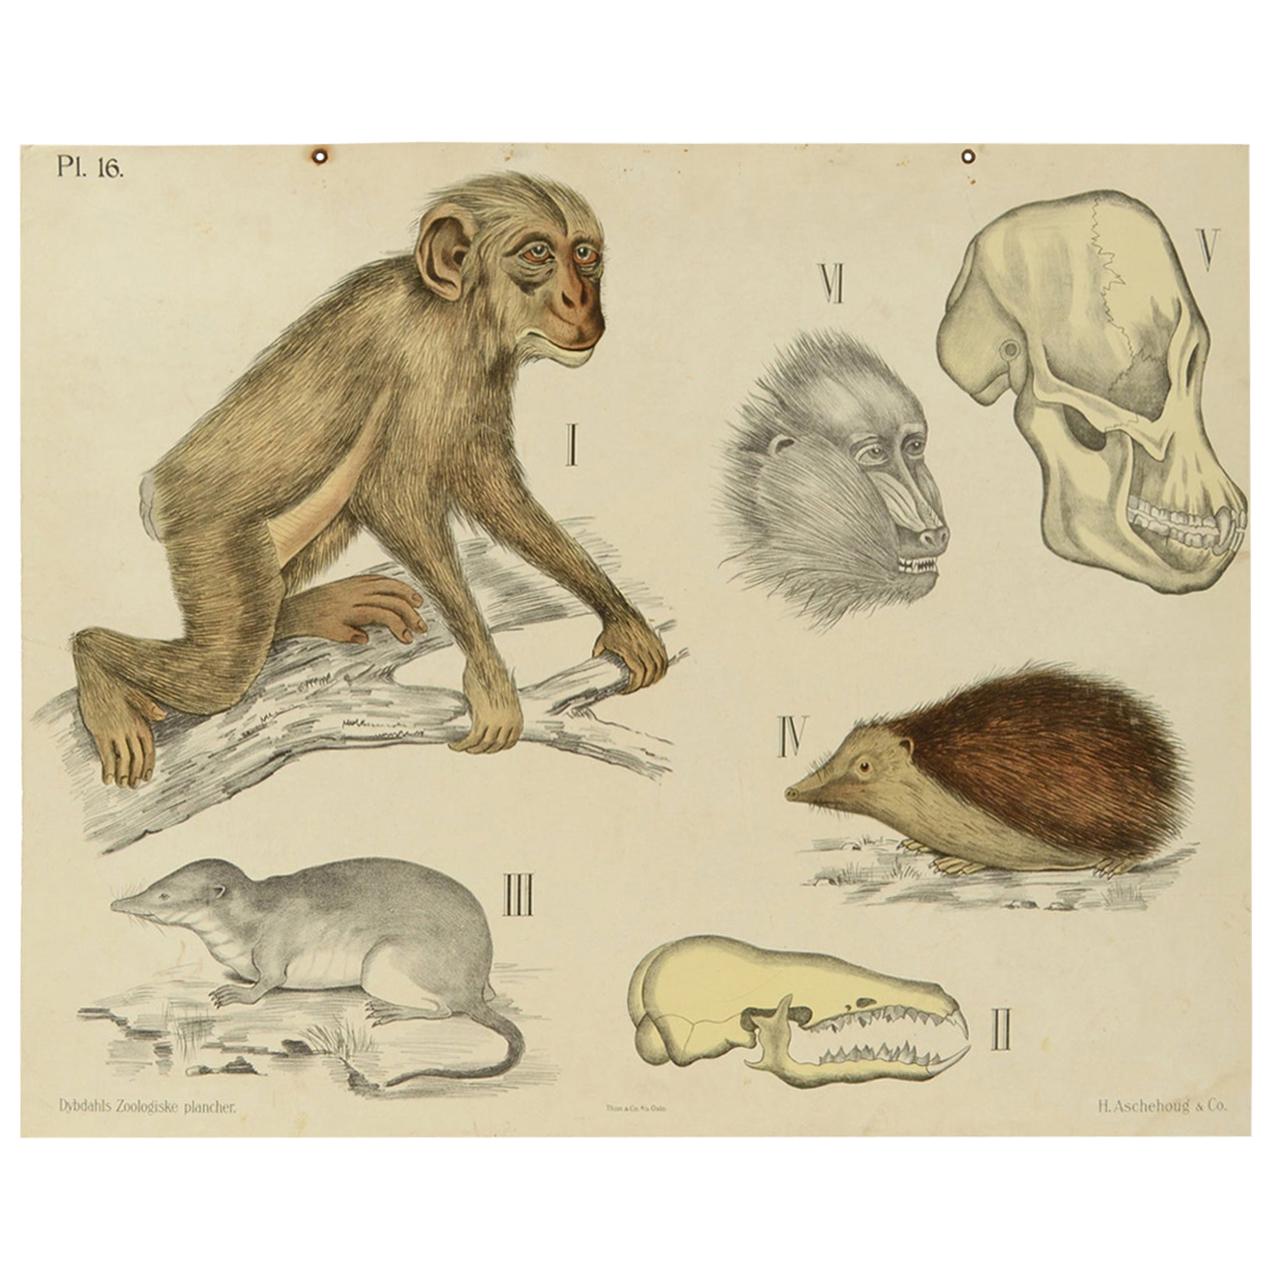 Zoological Lithograph Monkeys and Insectivores 1912  by H Aschehoug & Co, Norway